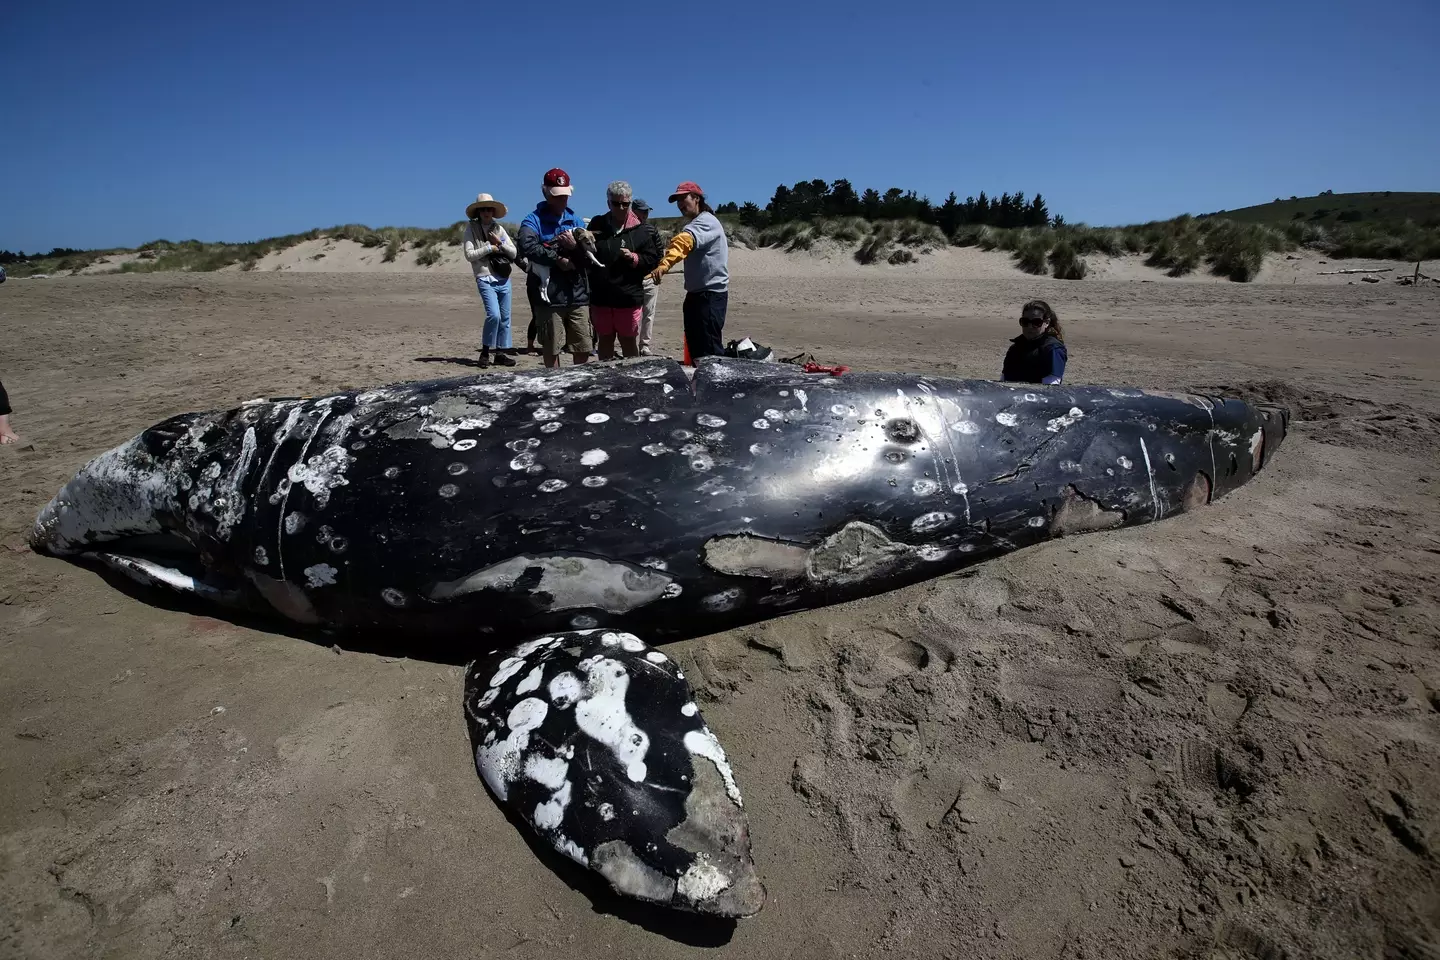 A gray whale washed up on shore.